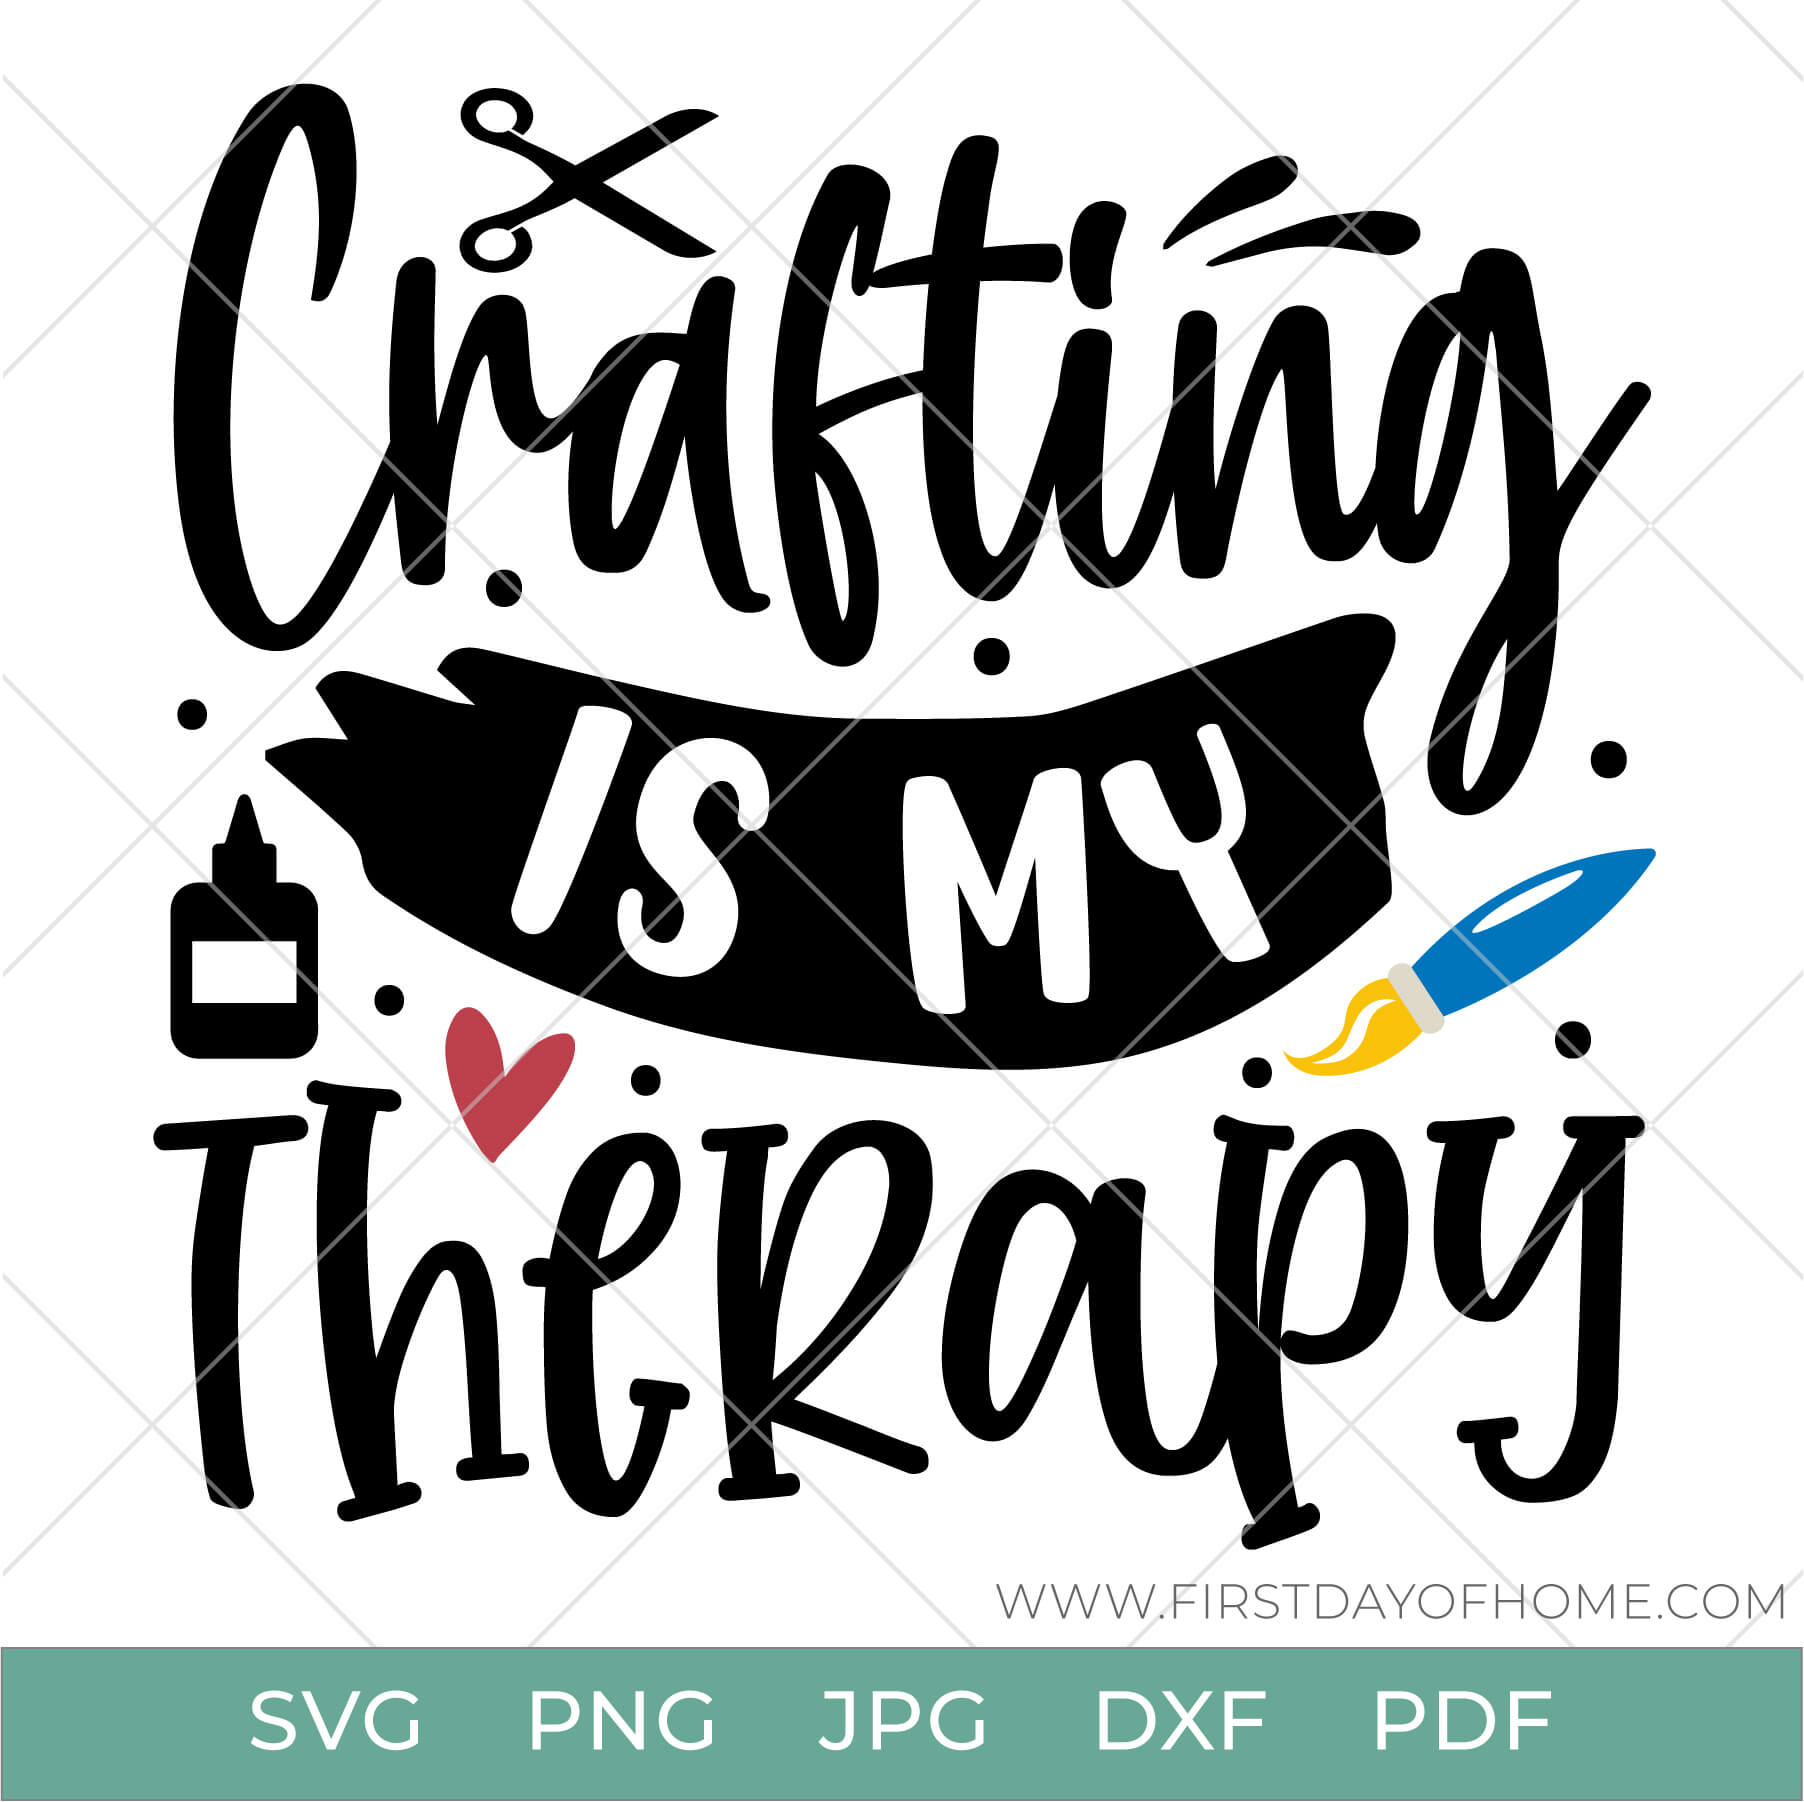 Crafting is My Therapy digital design with paintbrush, glue, and scissors (Cricut cut file design)